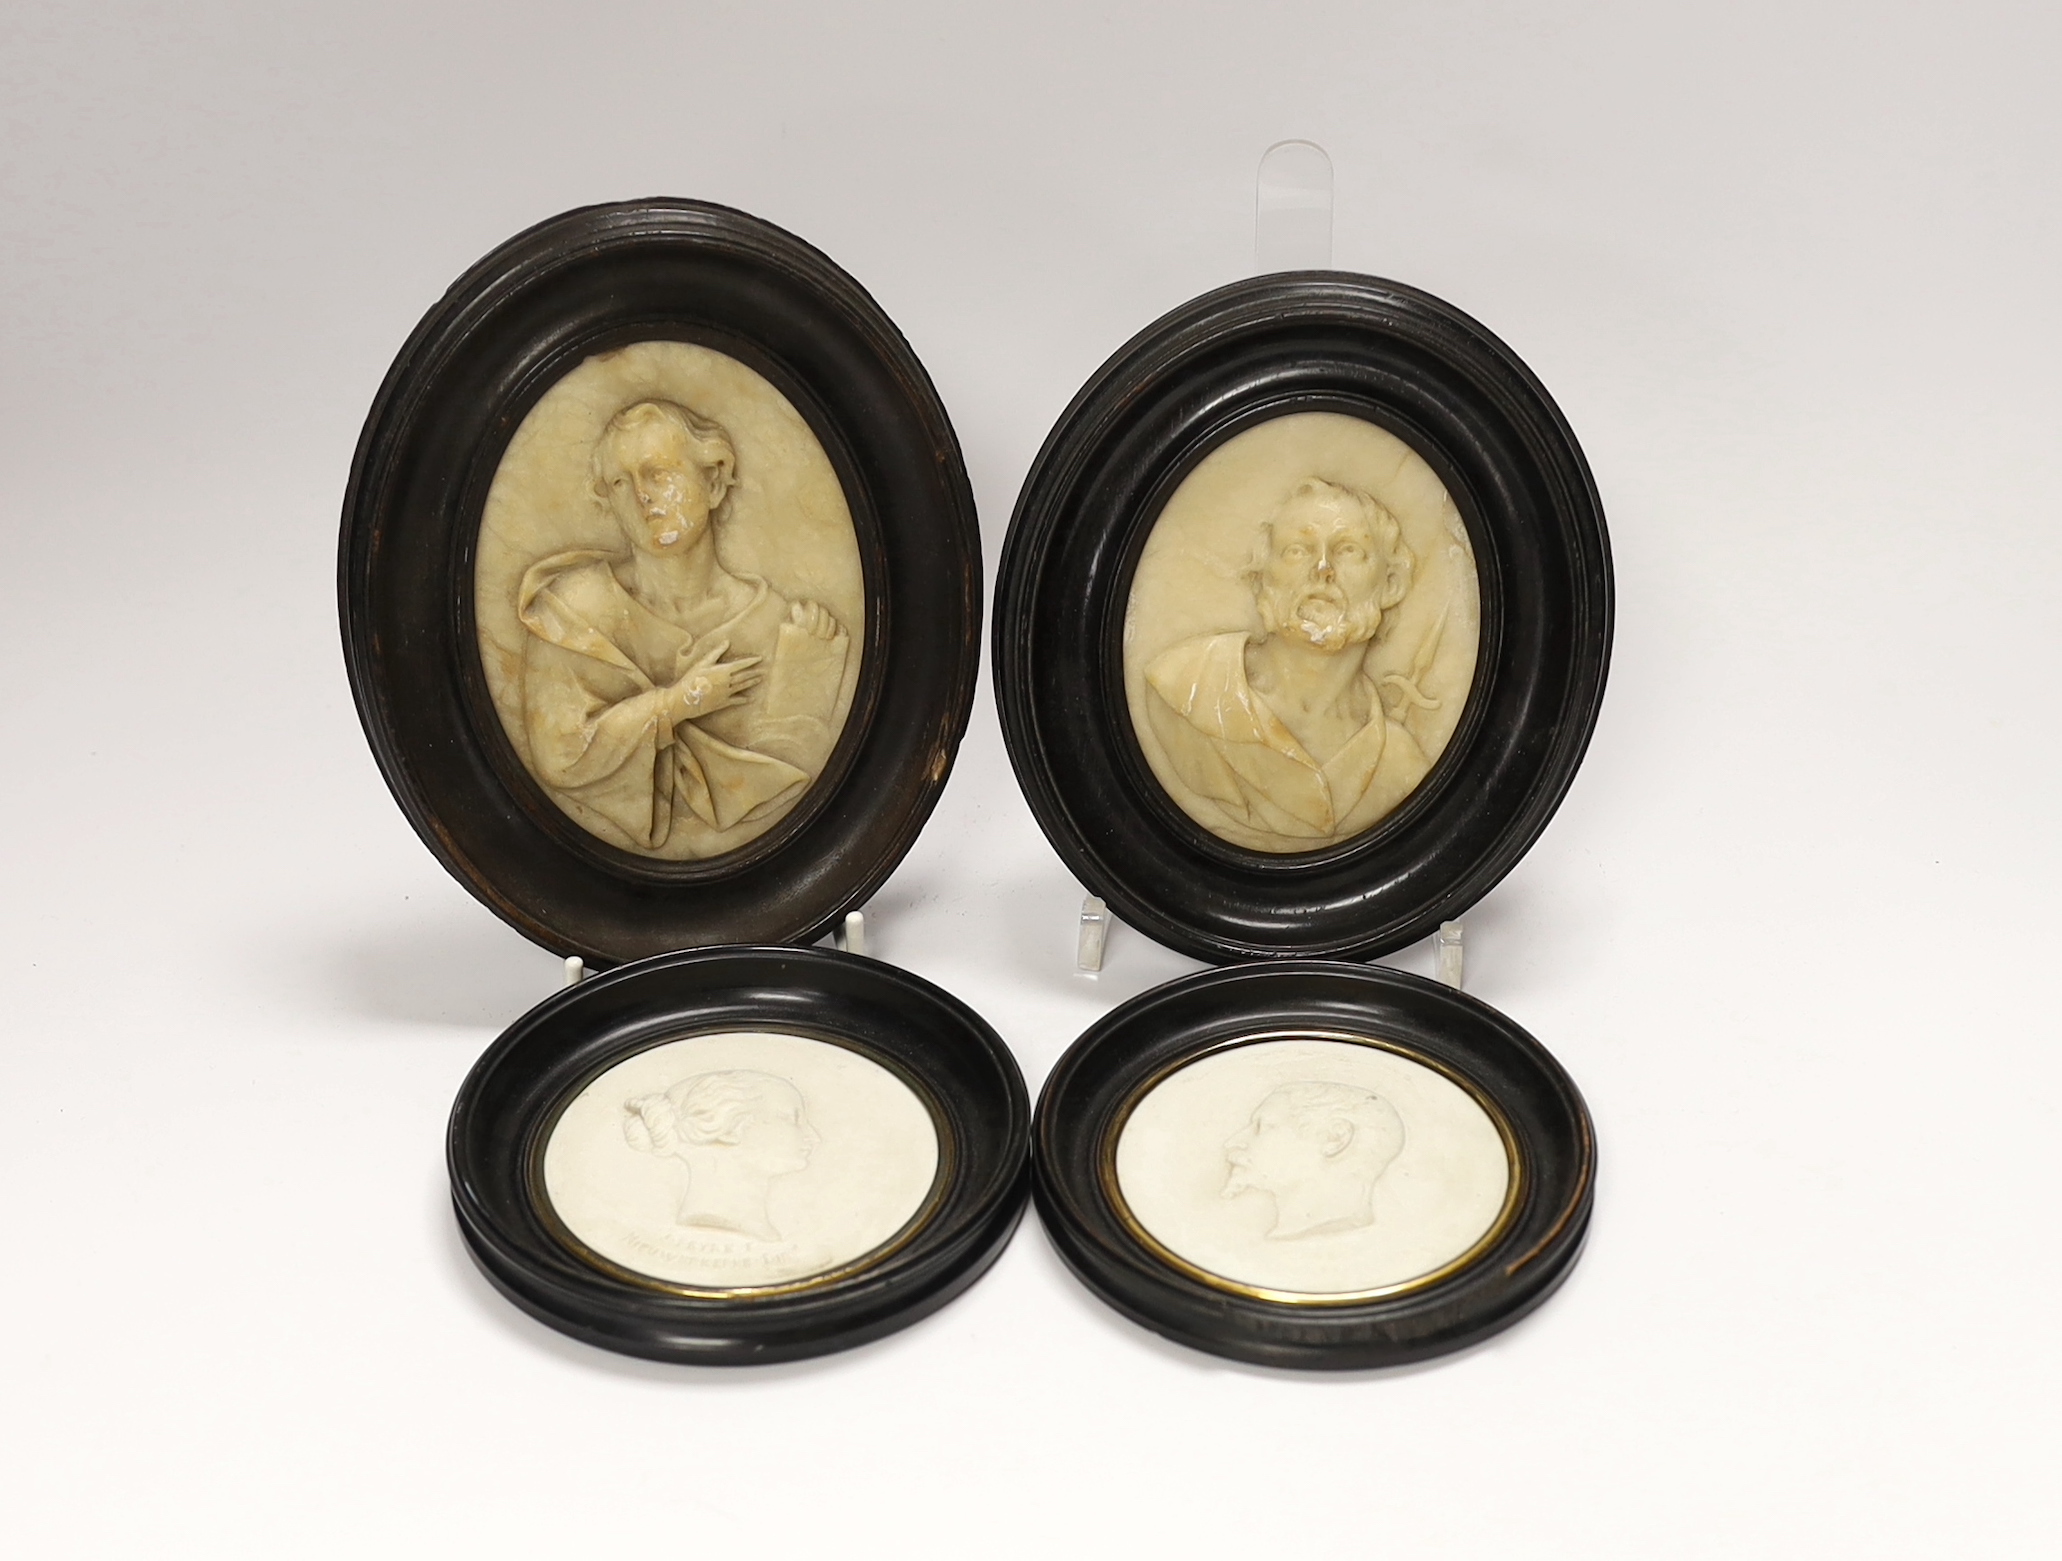 A pair of 19th century alabaster relief carved religious plaques and a pair of Sevres biscuit porcelain portrait plaques of Louis Napoleon and Eugene, housed in ebonized frames, largest overall 16cm high